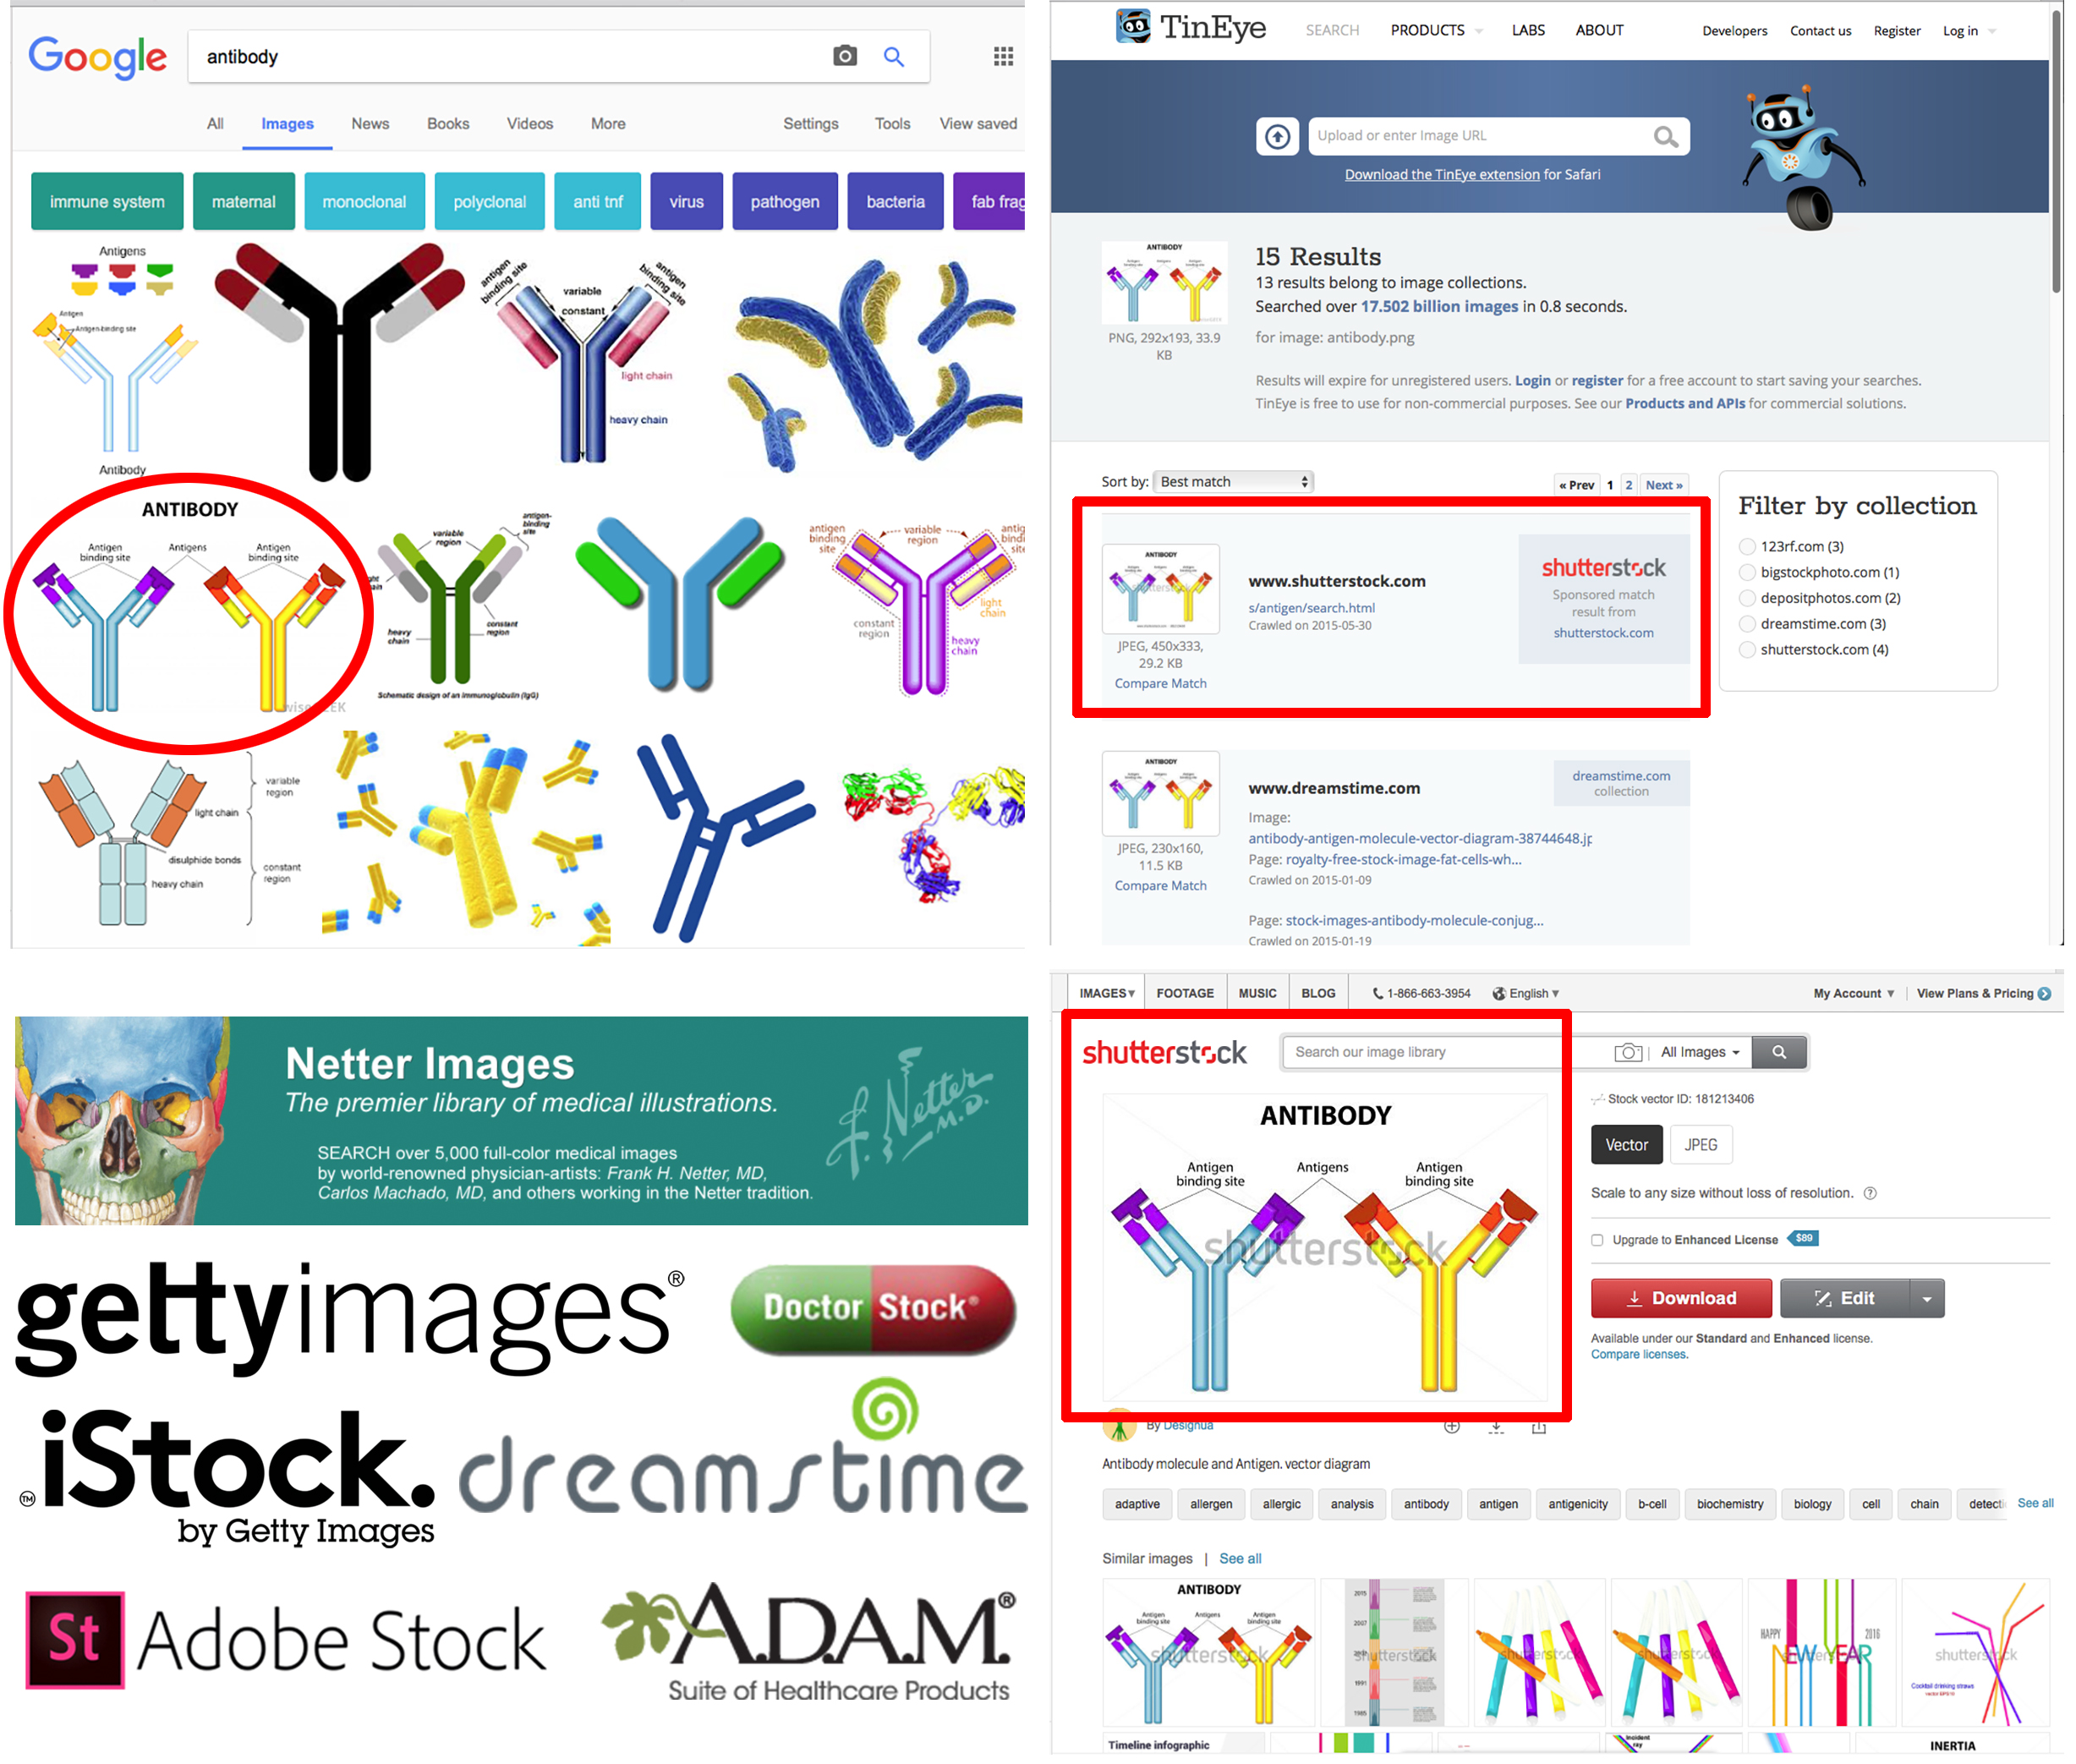 Upper left: Google image search for "antibody;" upper right: TinEye image search for commercial image sources; lower right: shutterstock.com royalty-free image available for fee; bottom left: popular commercial royalty-free sources